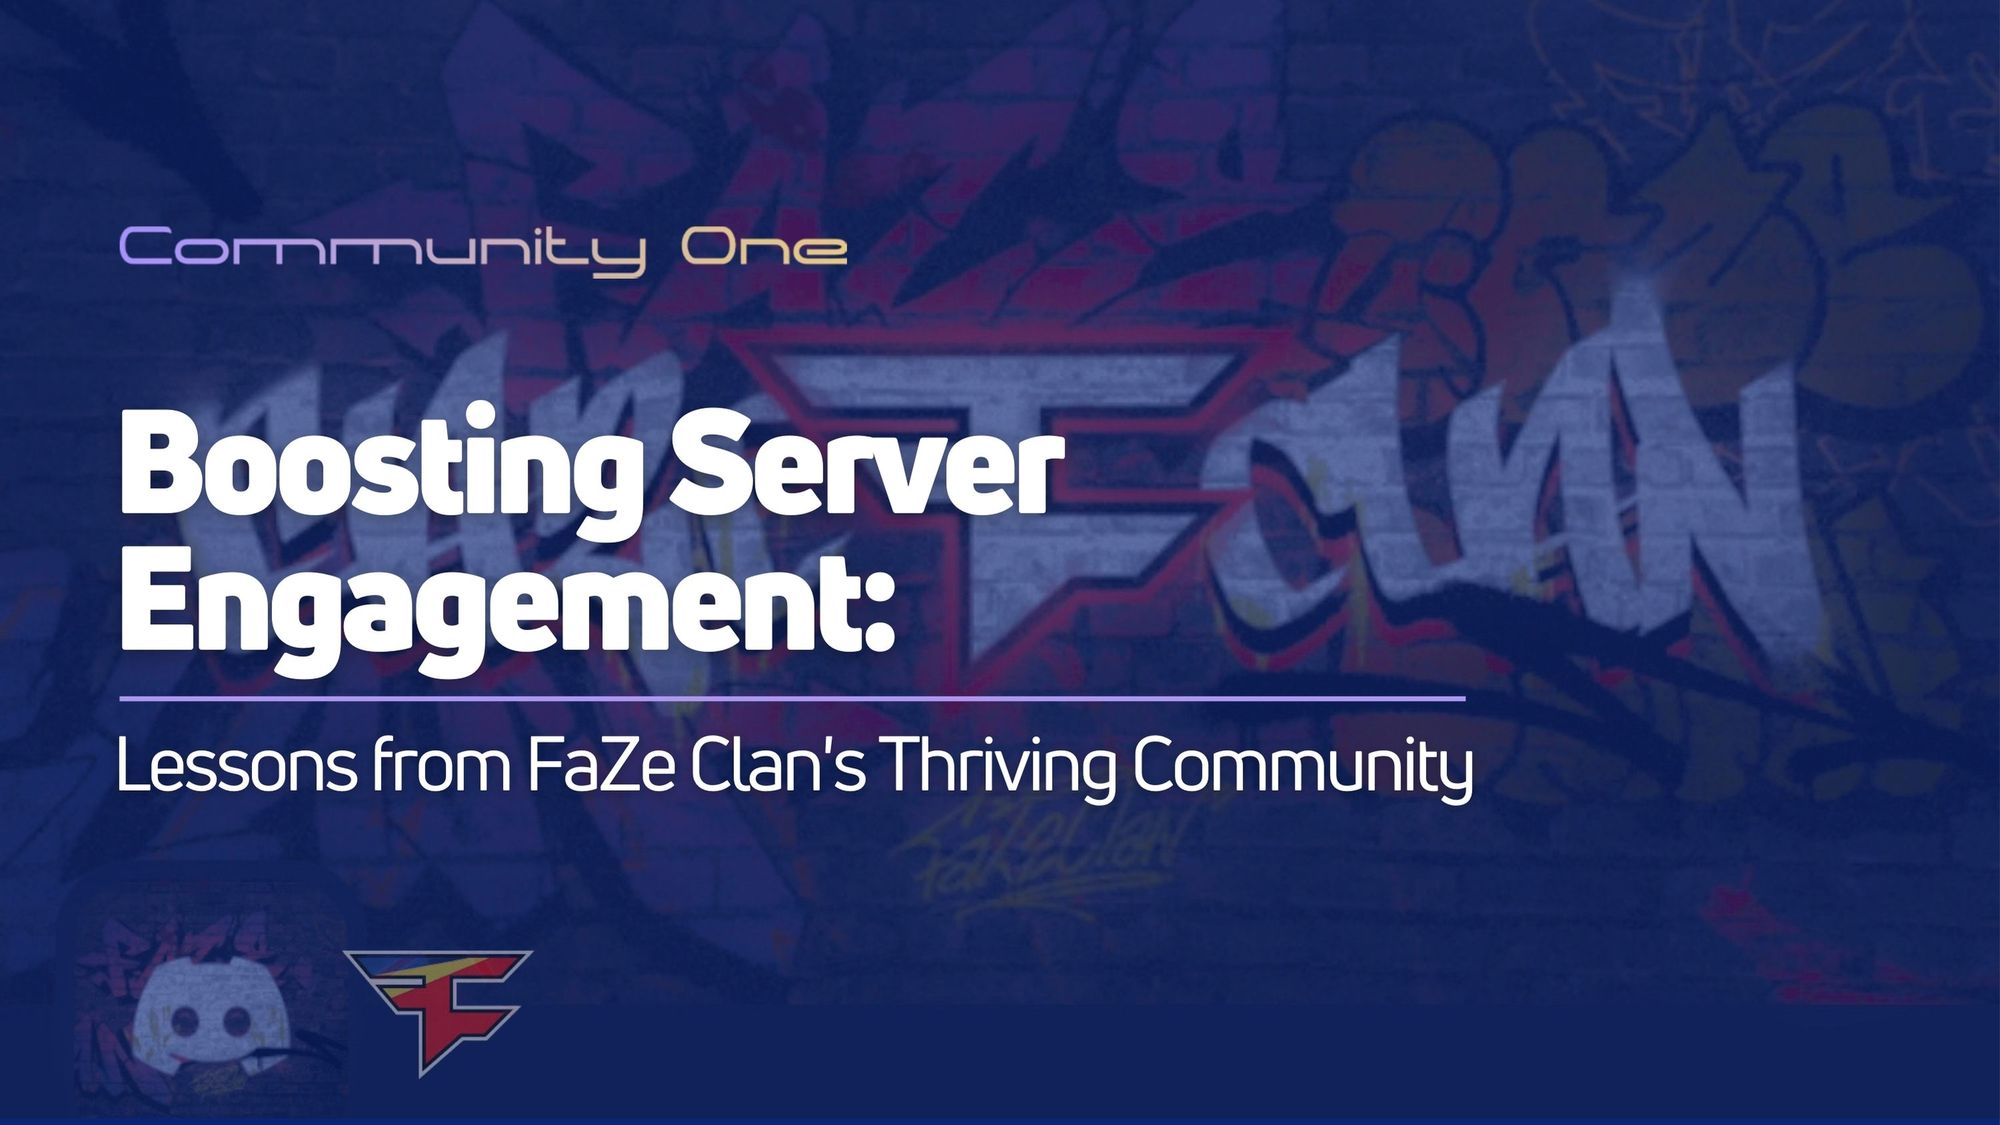 Boosting Server Engagement: Lessons from FaZe Clan's Thriving Community